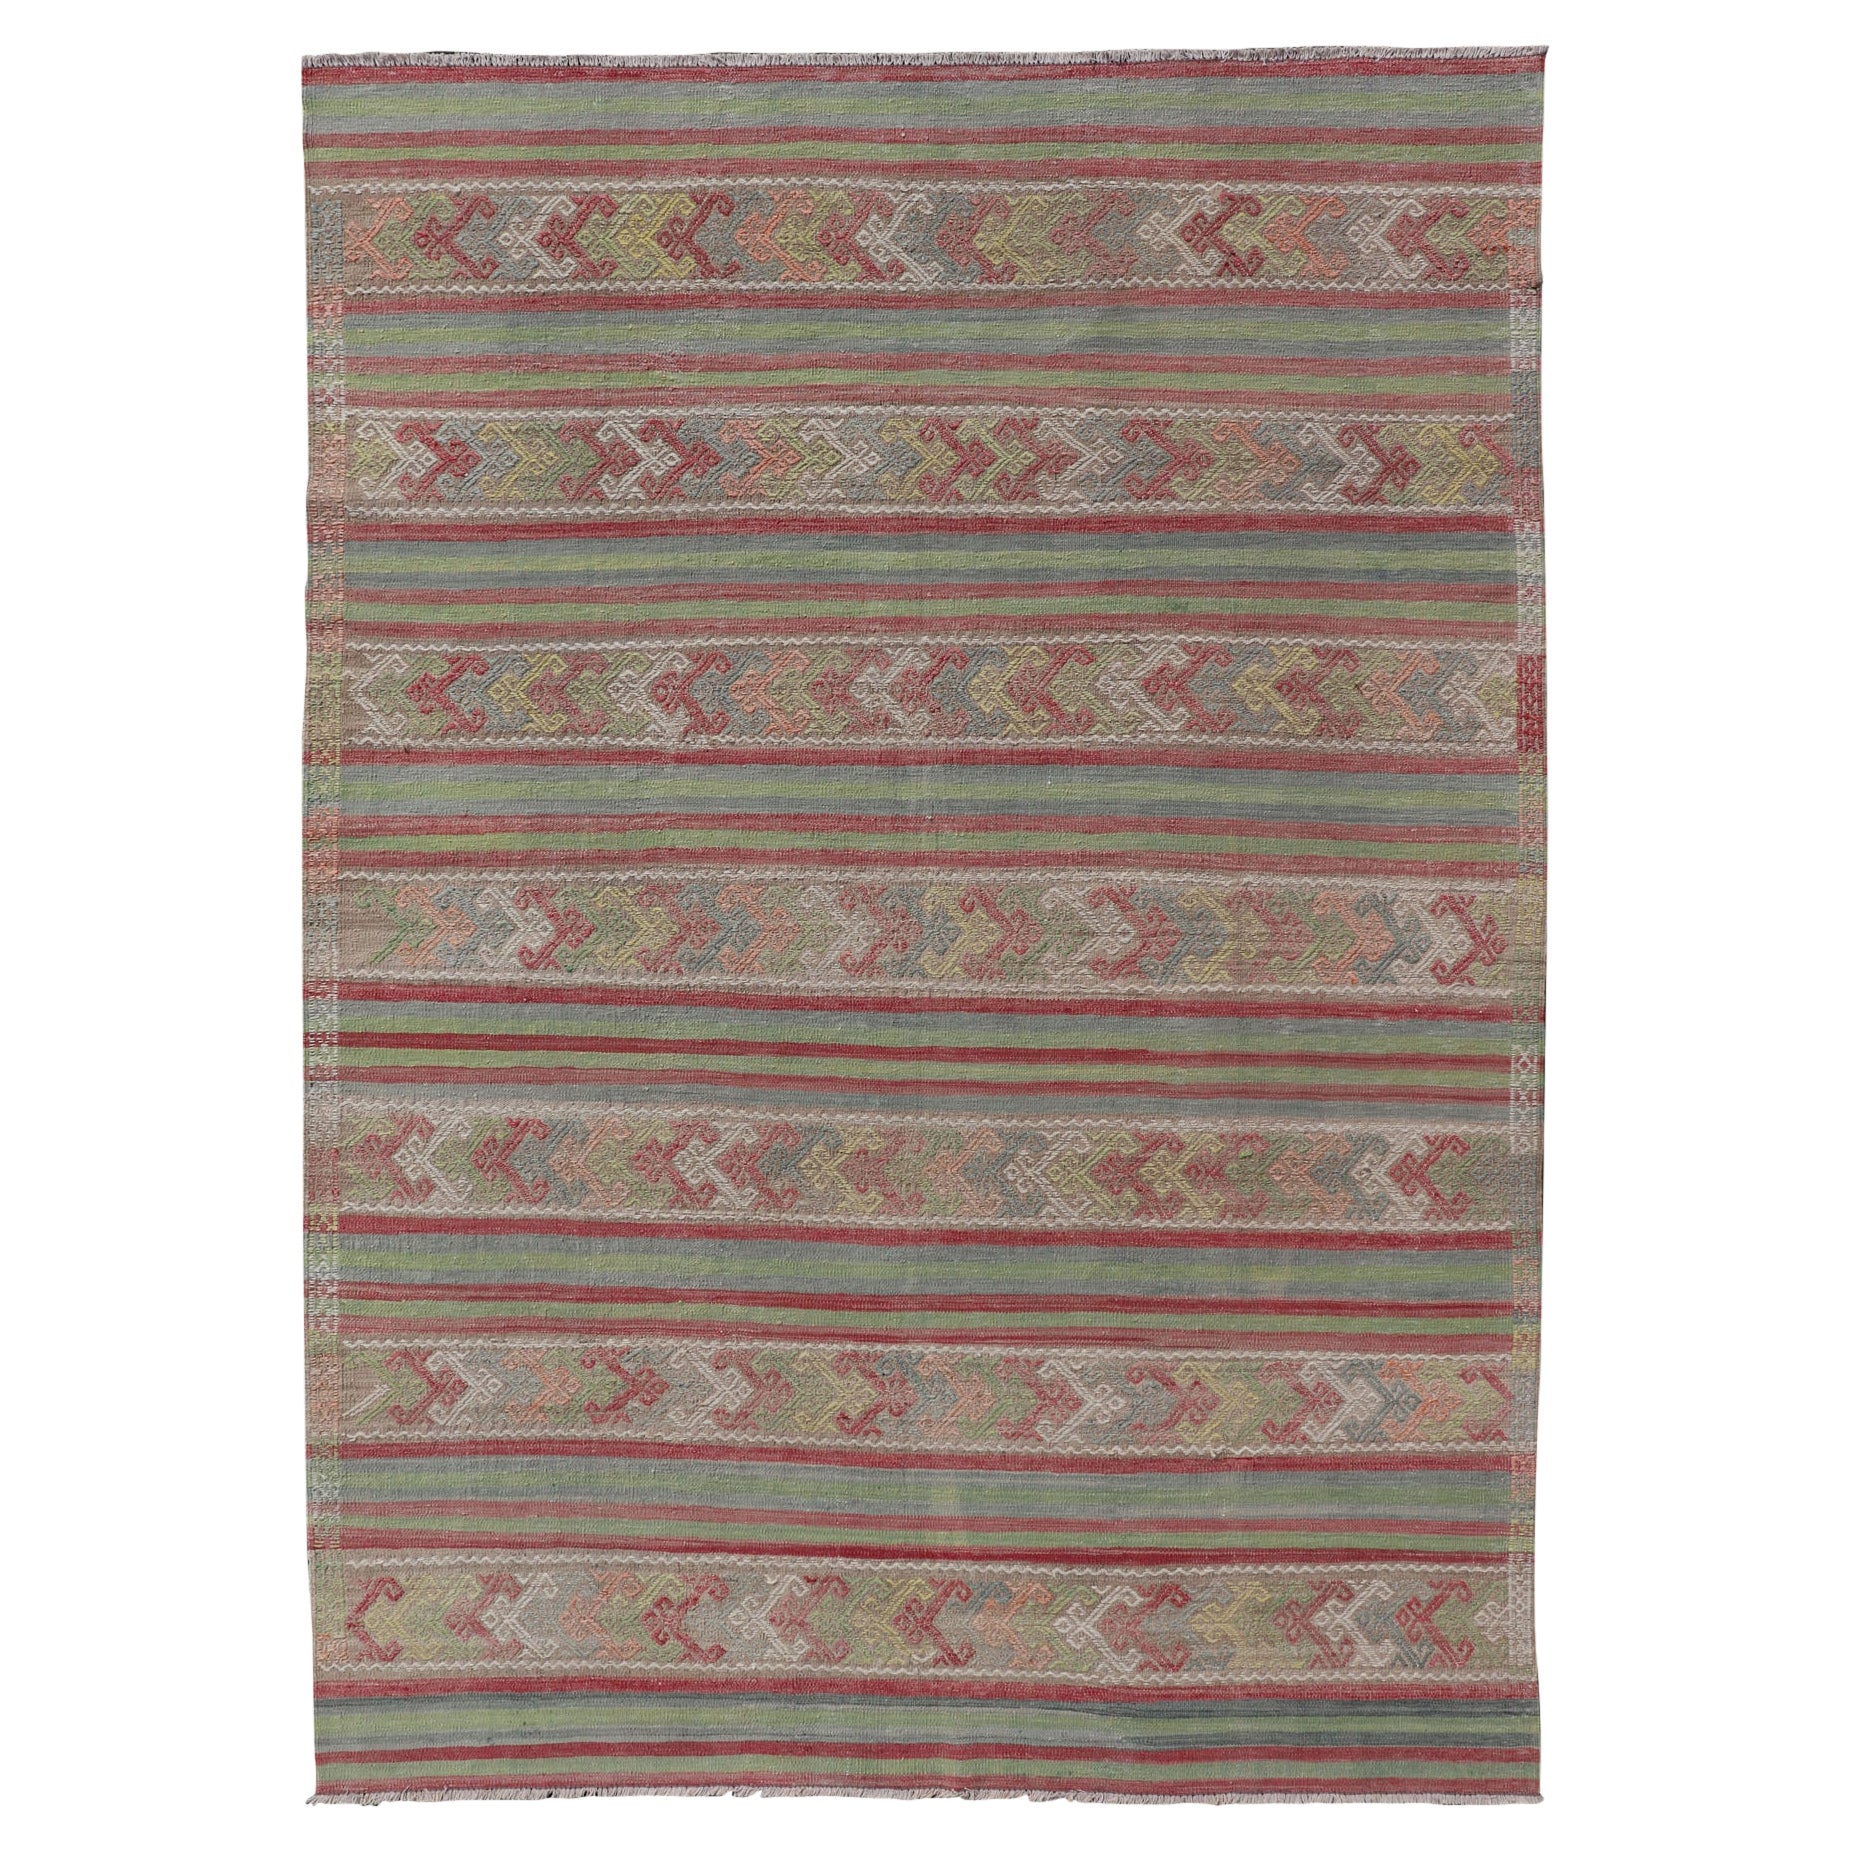 Colorful Vintage Embroidered Kilim with Stripes and Alternating Geometric Motifs For Sale